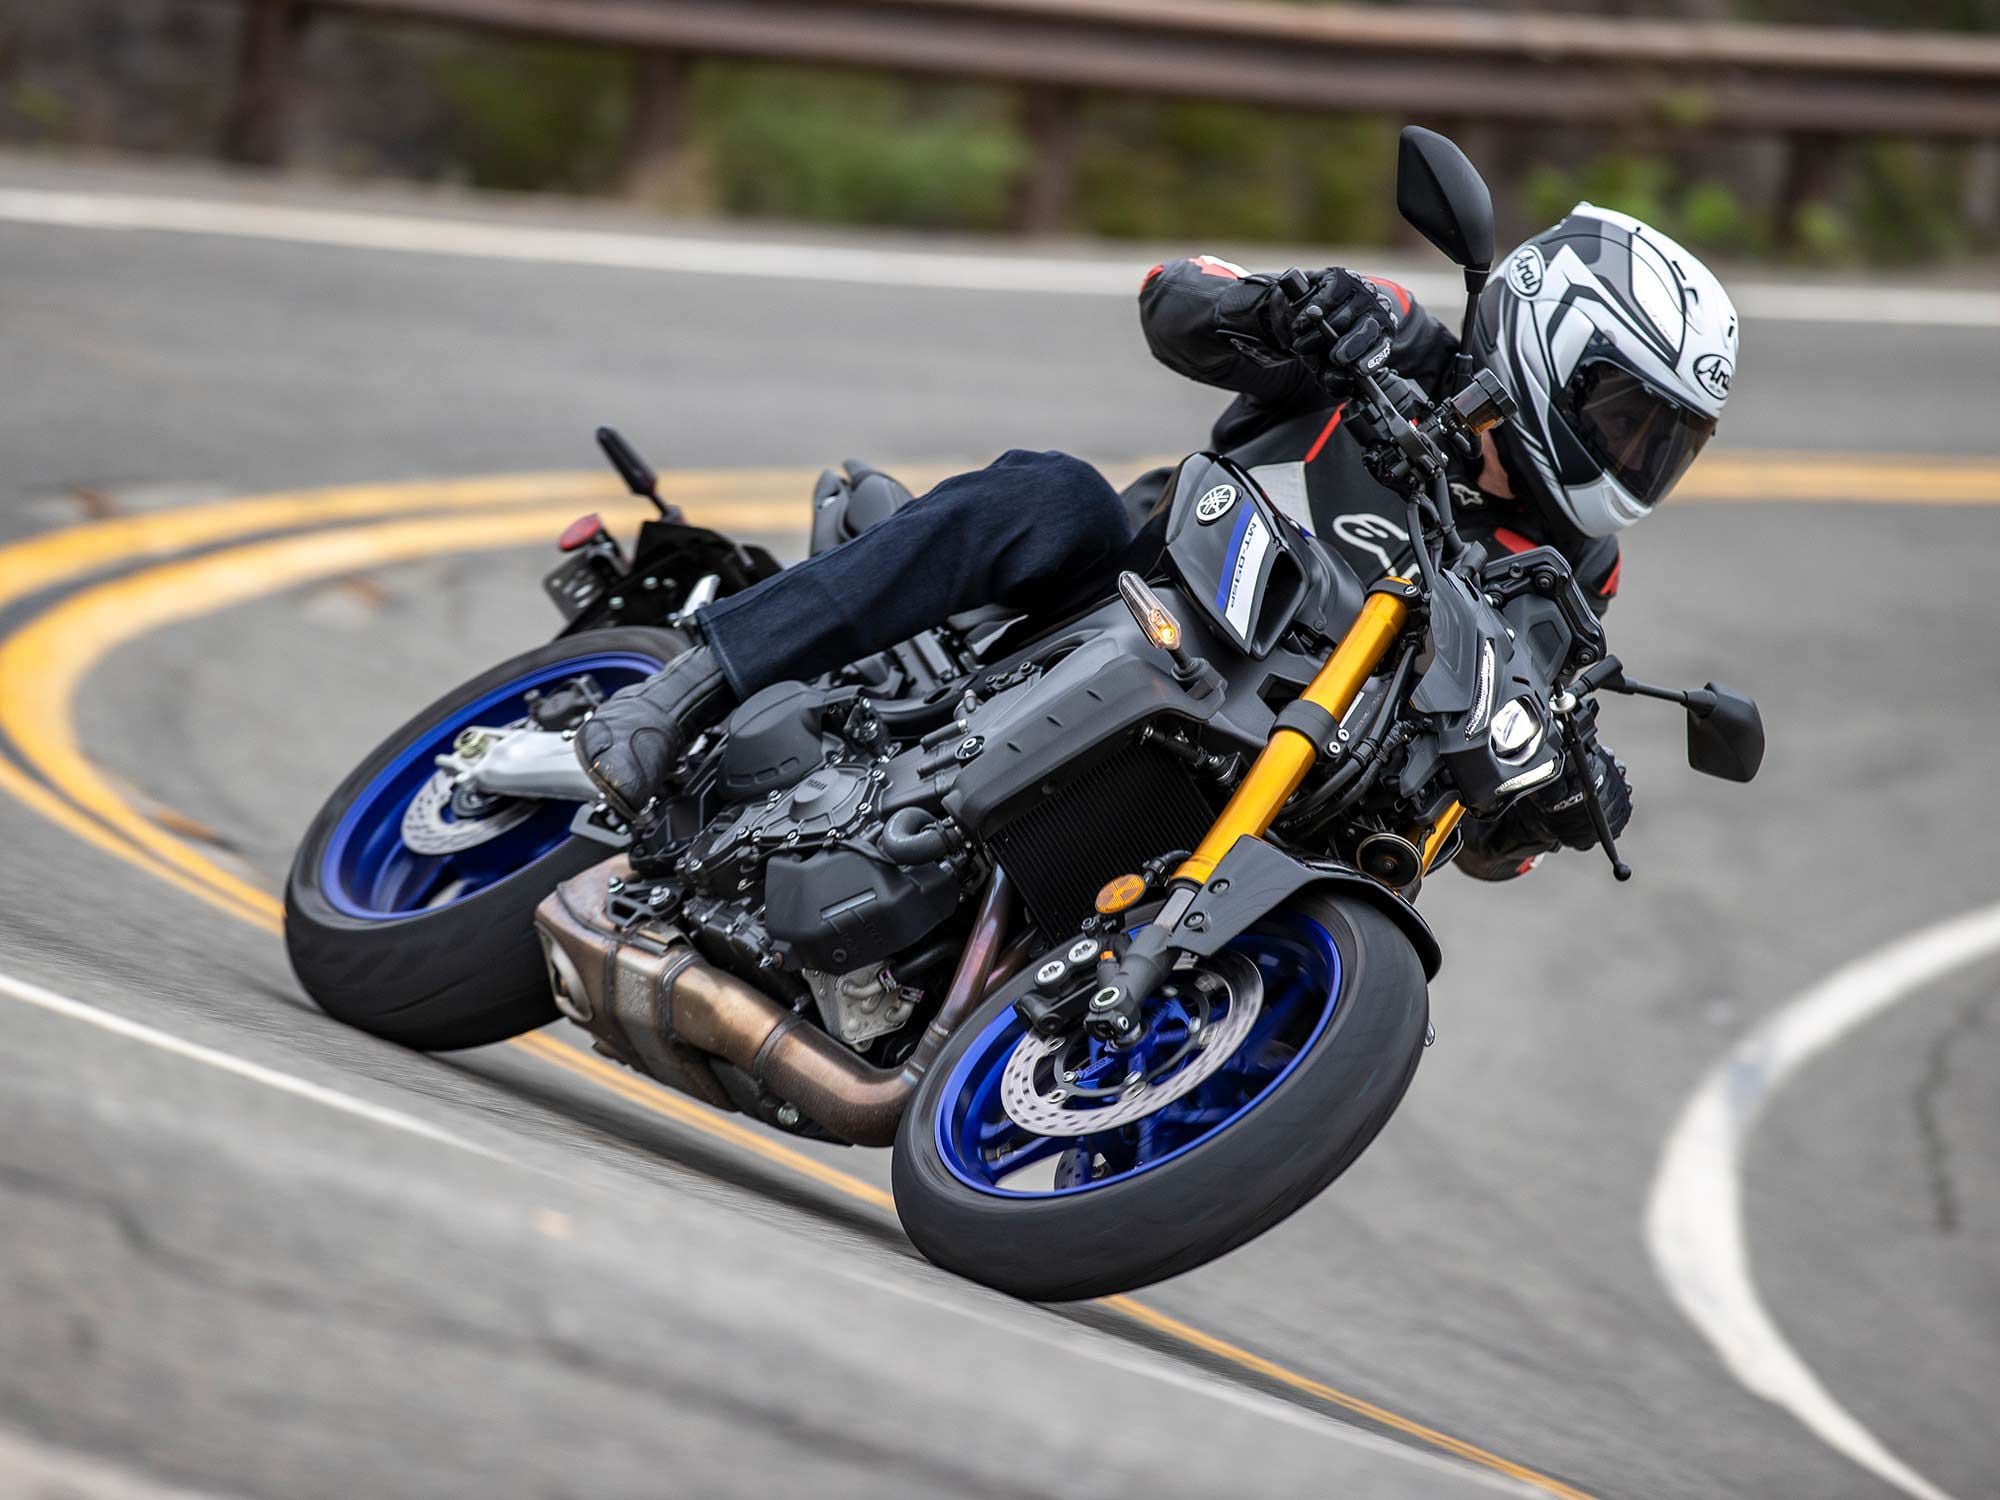 Yamaha added more performance to the MT-09 SP with upgraded suspension rather than more power.